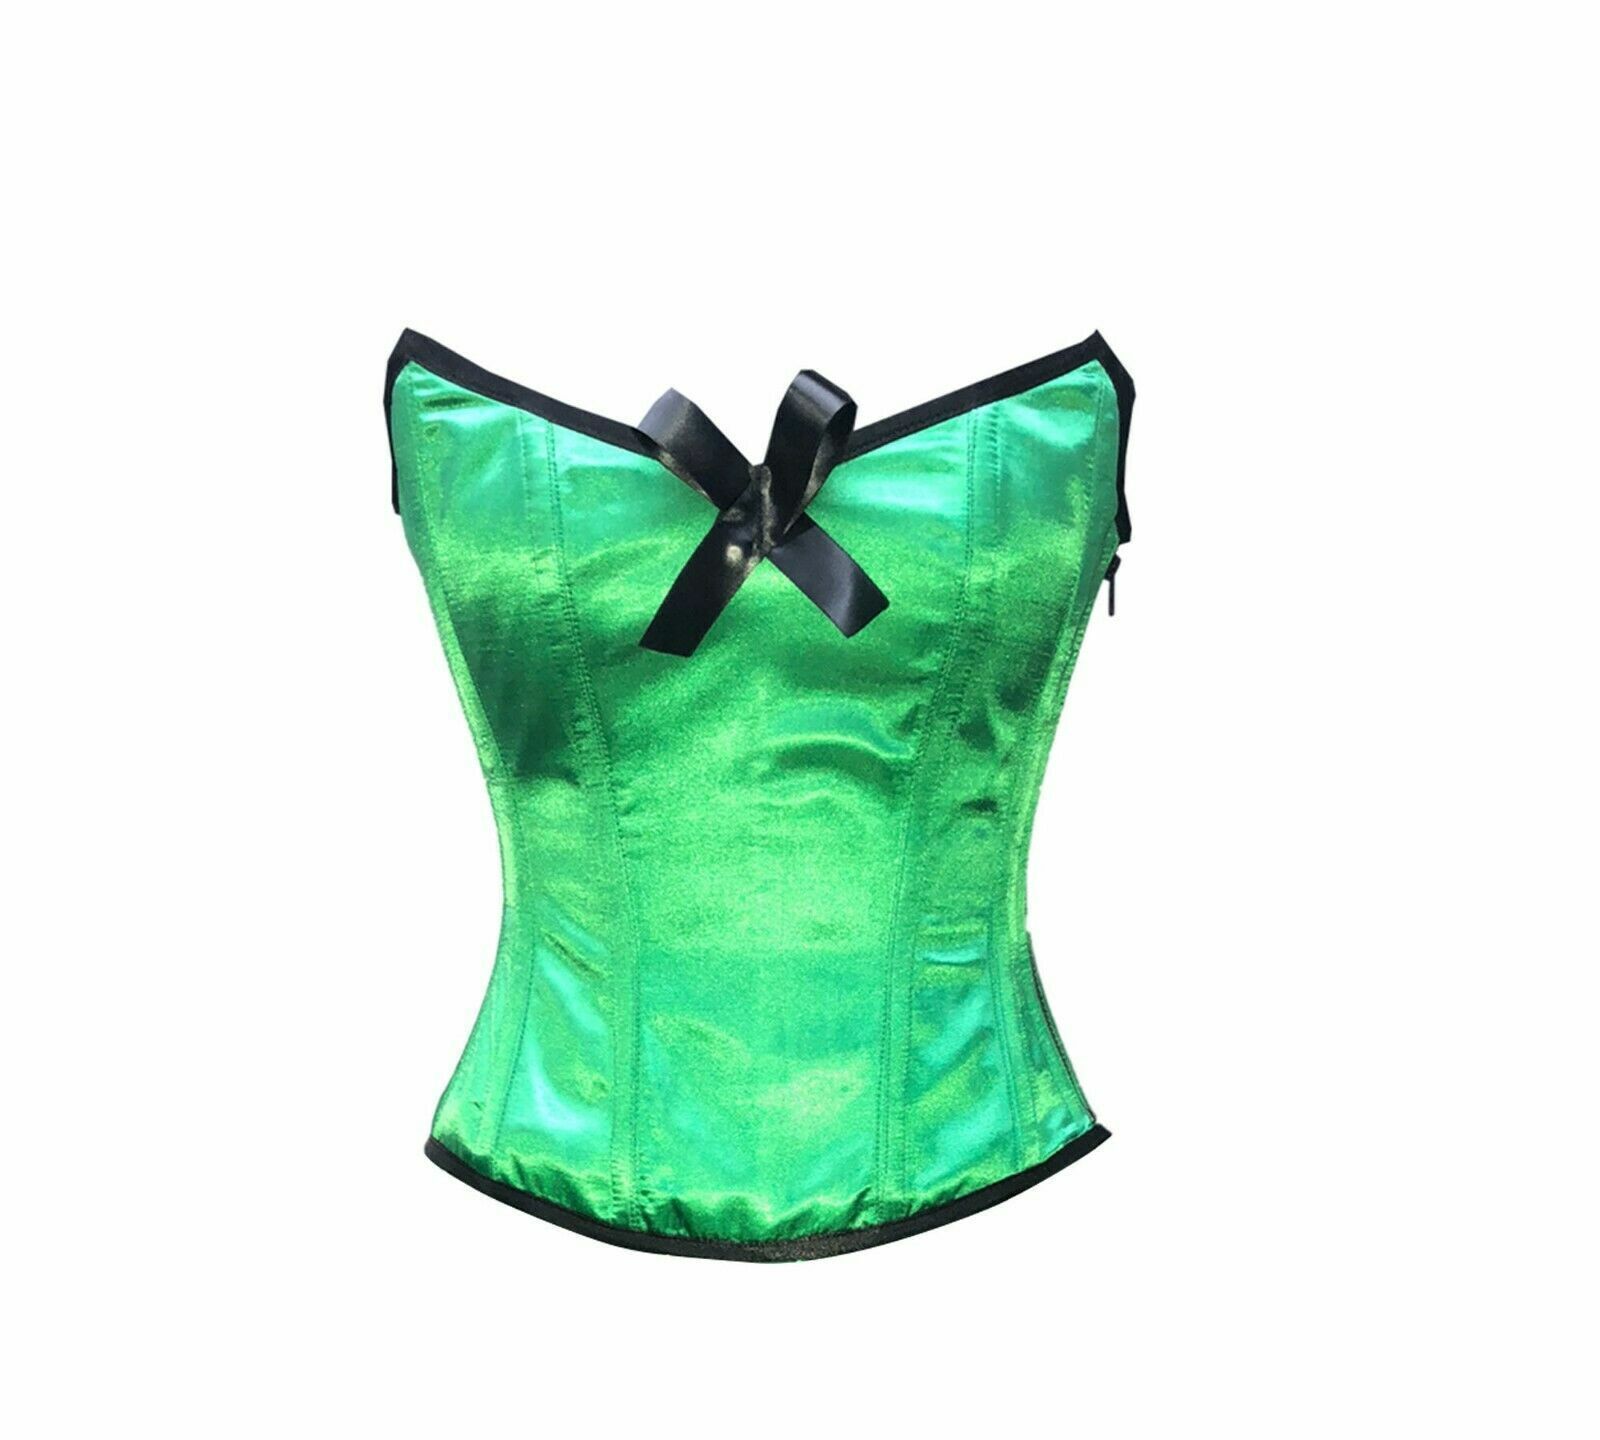 Primary image for Green Satin Corset Zipper with Black Bow Gothic Burlesque Costume Waist Training